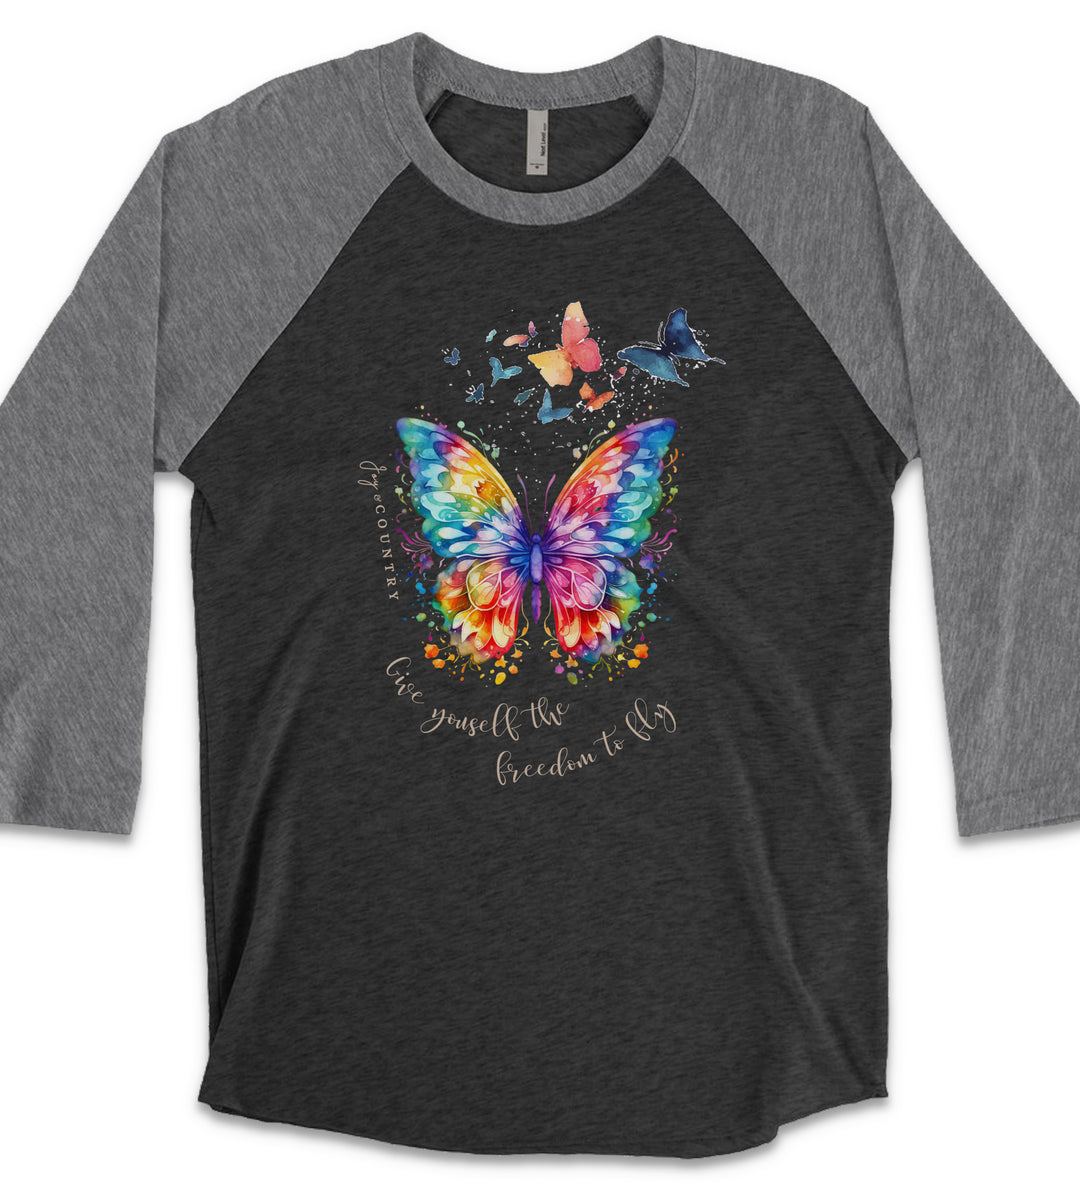 Give Yourself The Freedom To Fly - Butterflies - Unisex Tri-Blend 3/4 Sleeve Raglan Tee